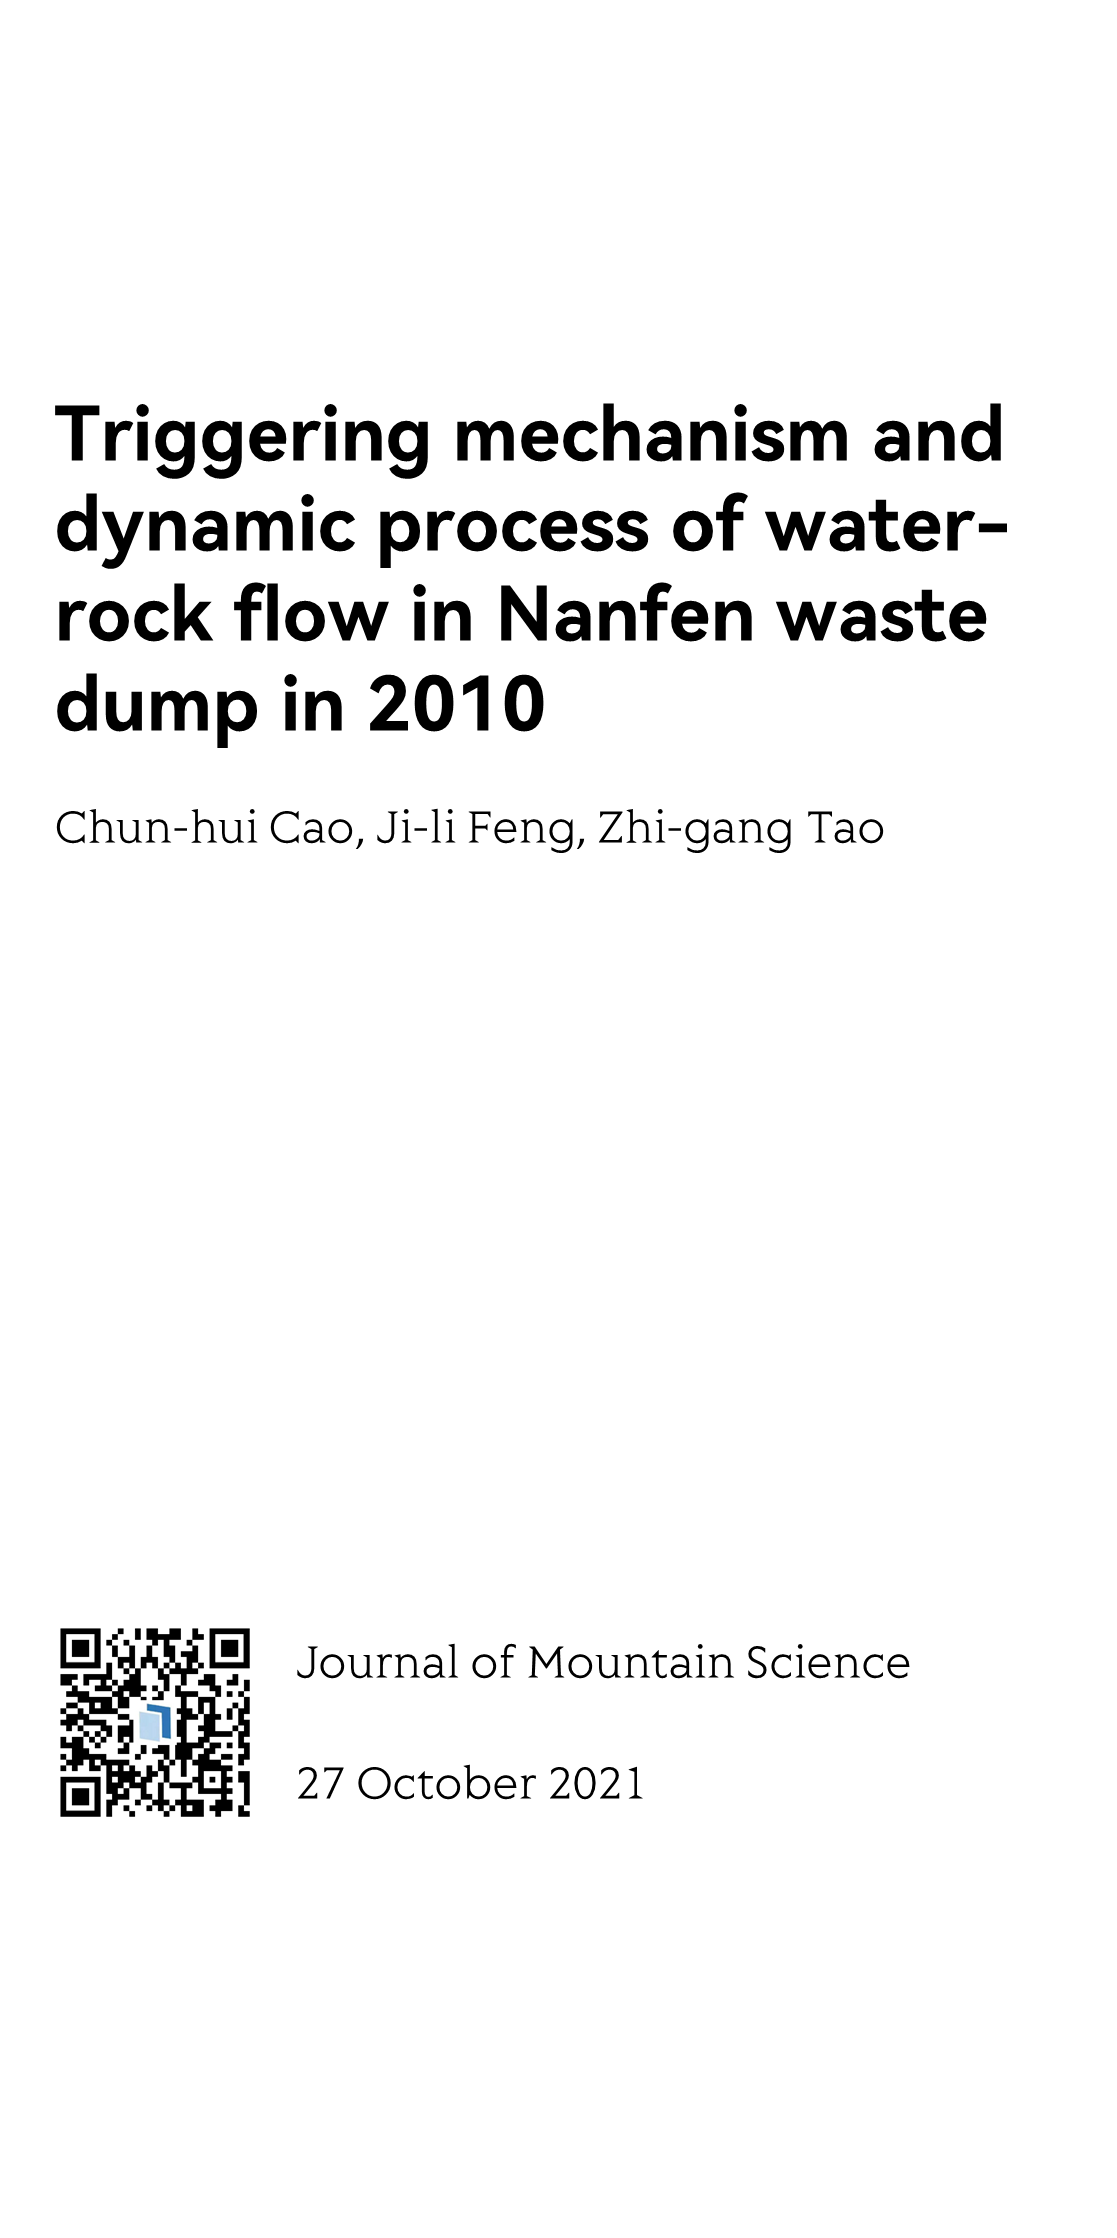 Triggering mechanism and dynamic process of water-rock flow in Nanfen waste dump in 2010_1